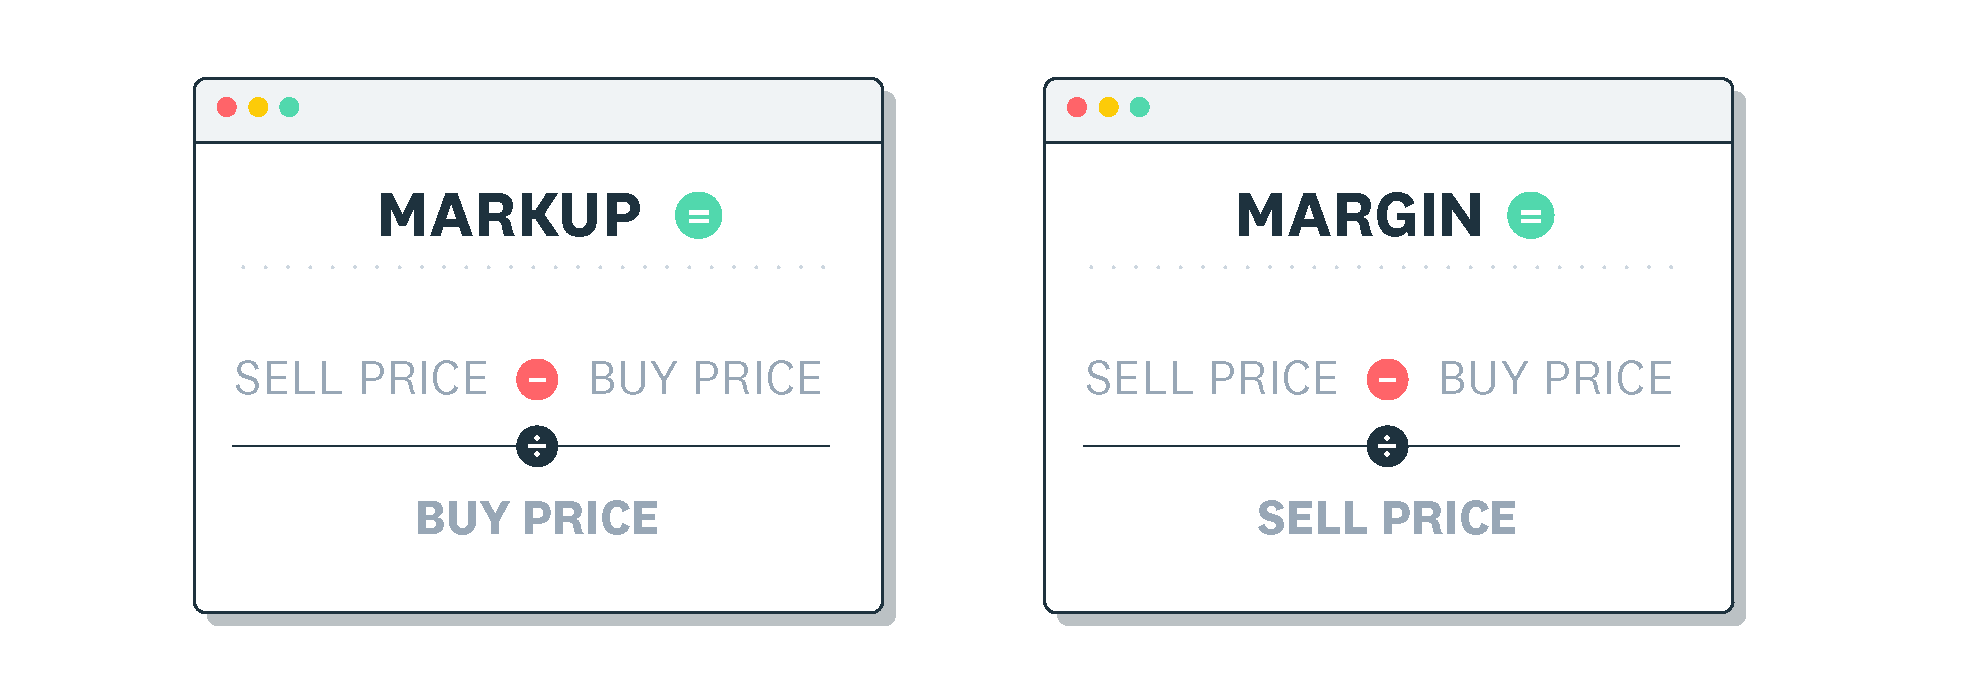 Margin versus markup. Both calculations start with sell price minus buy price. For markup, that number is divided by the buy 